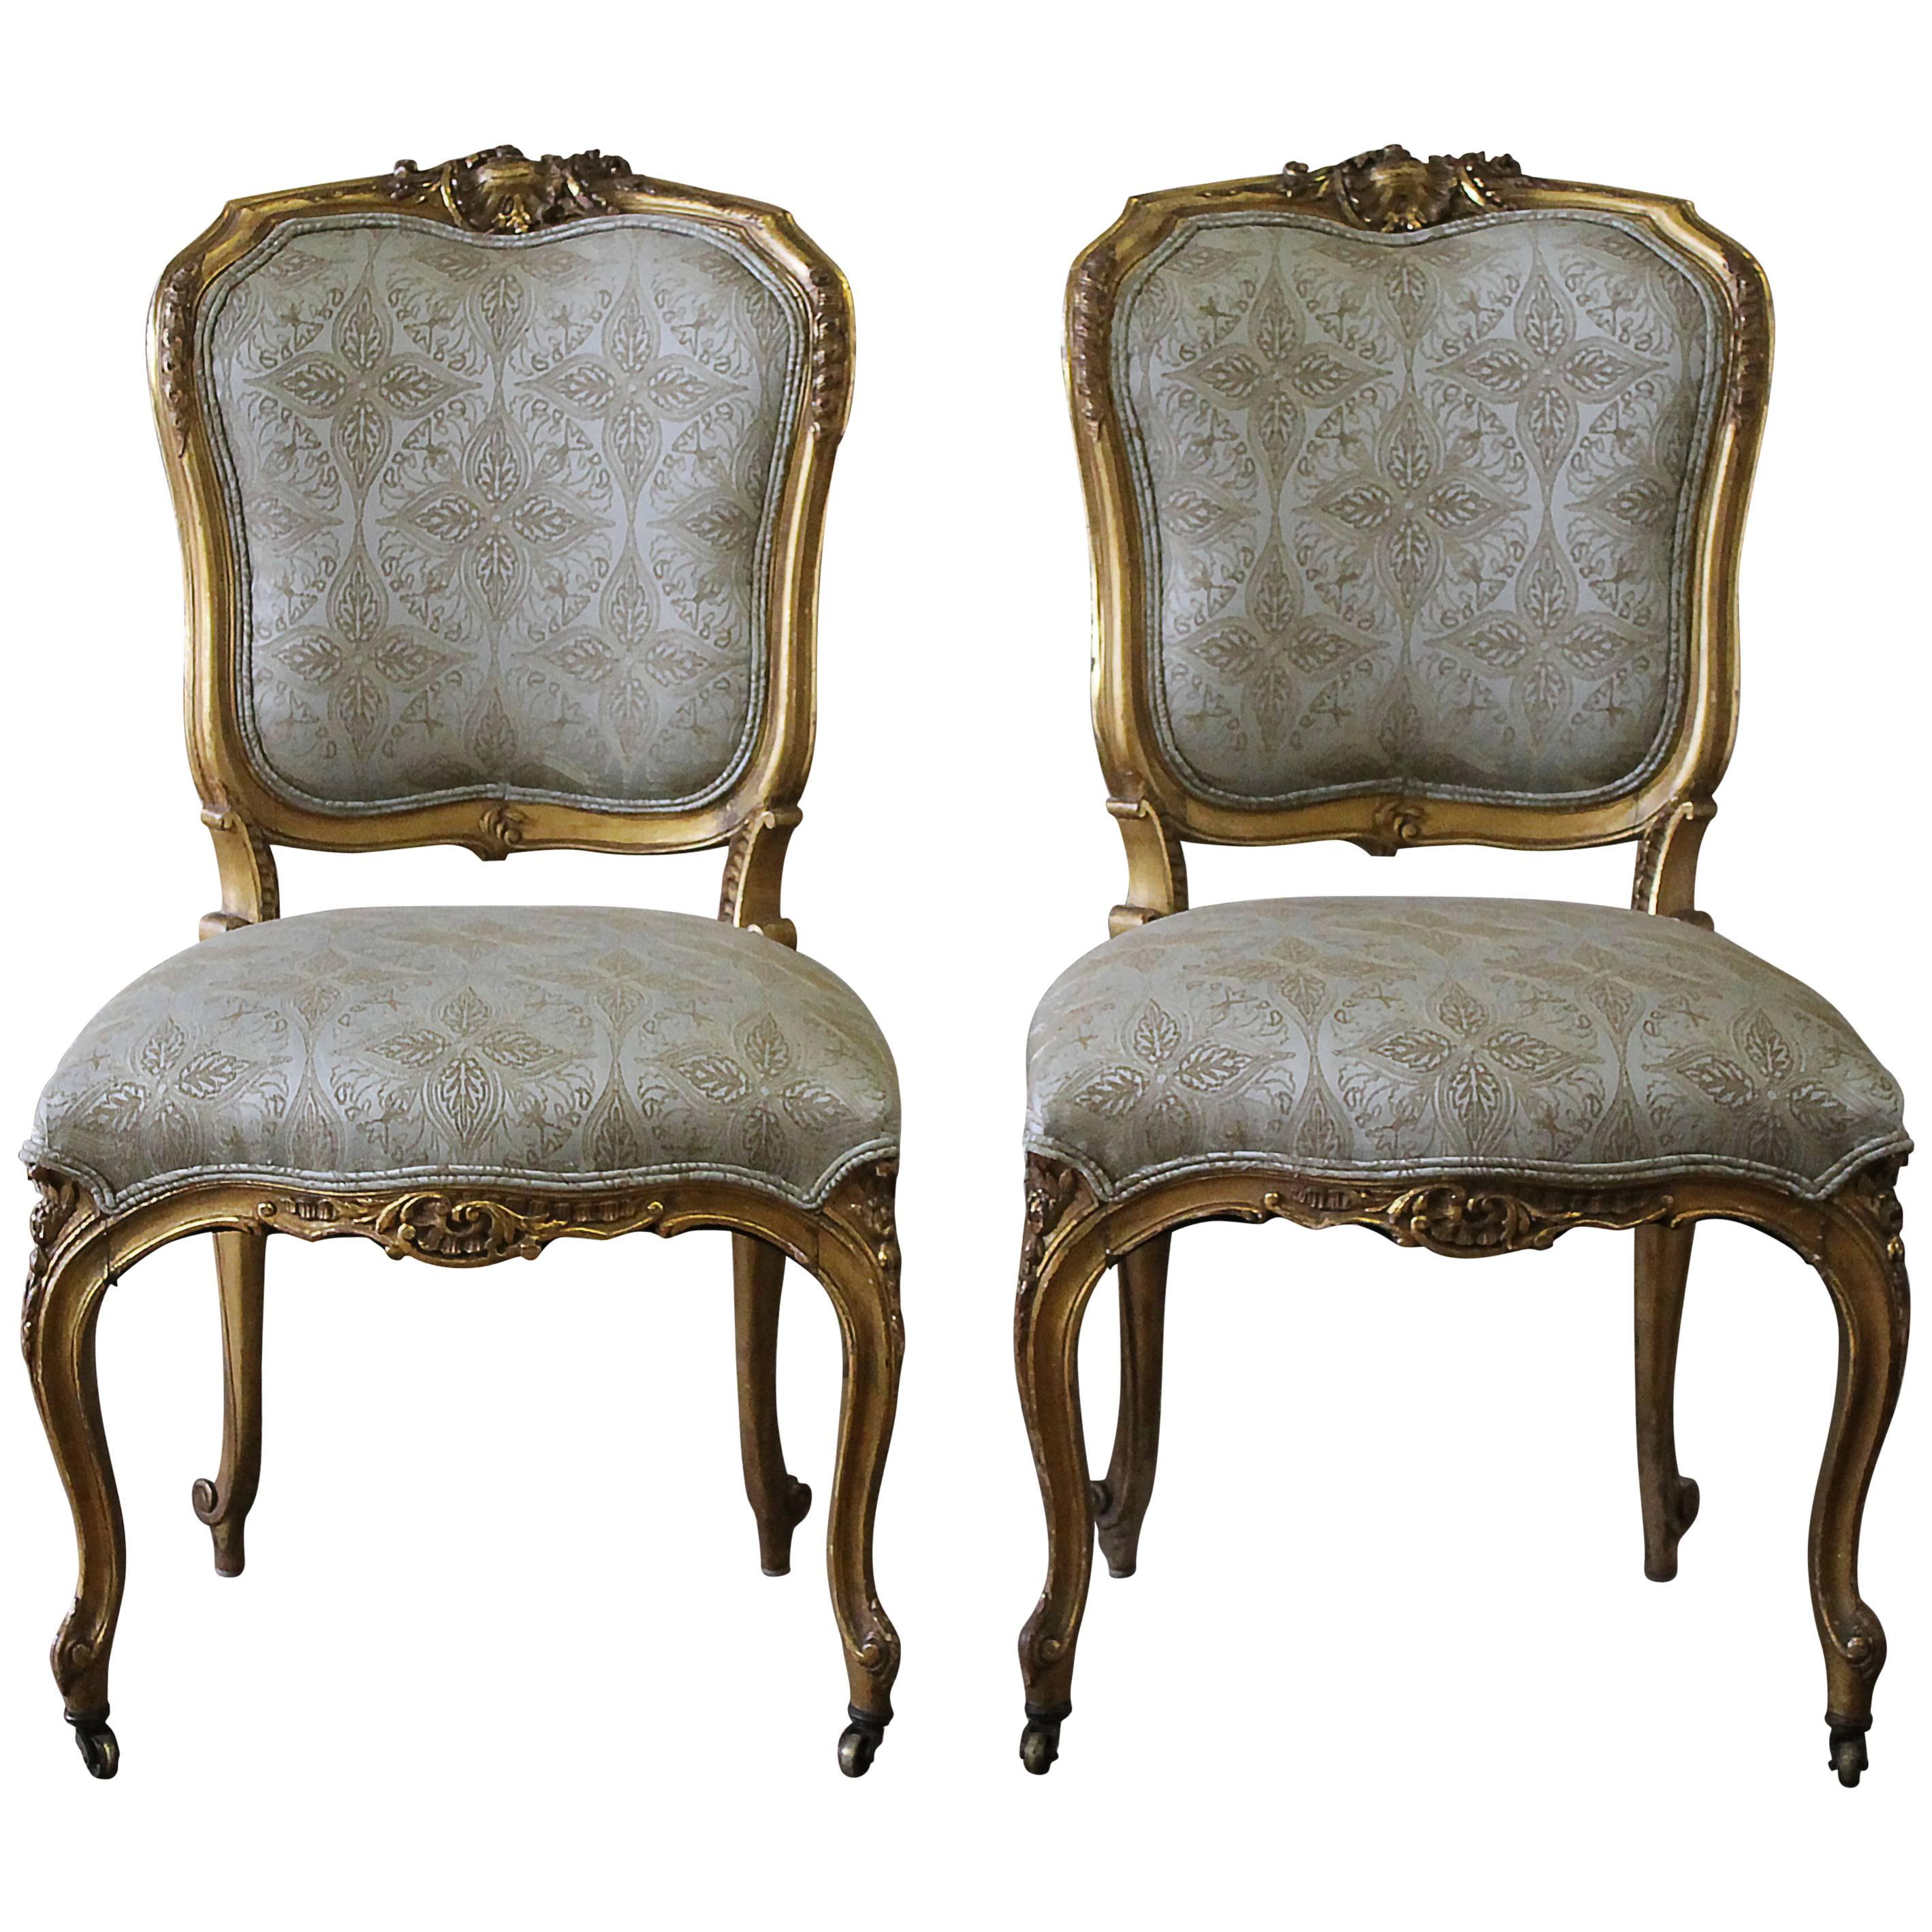 Pair of 19th Century Louis XV Carved and Upholstered Giltwood Chairs